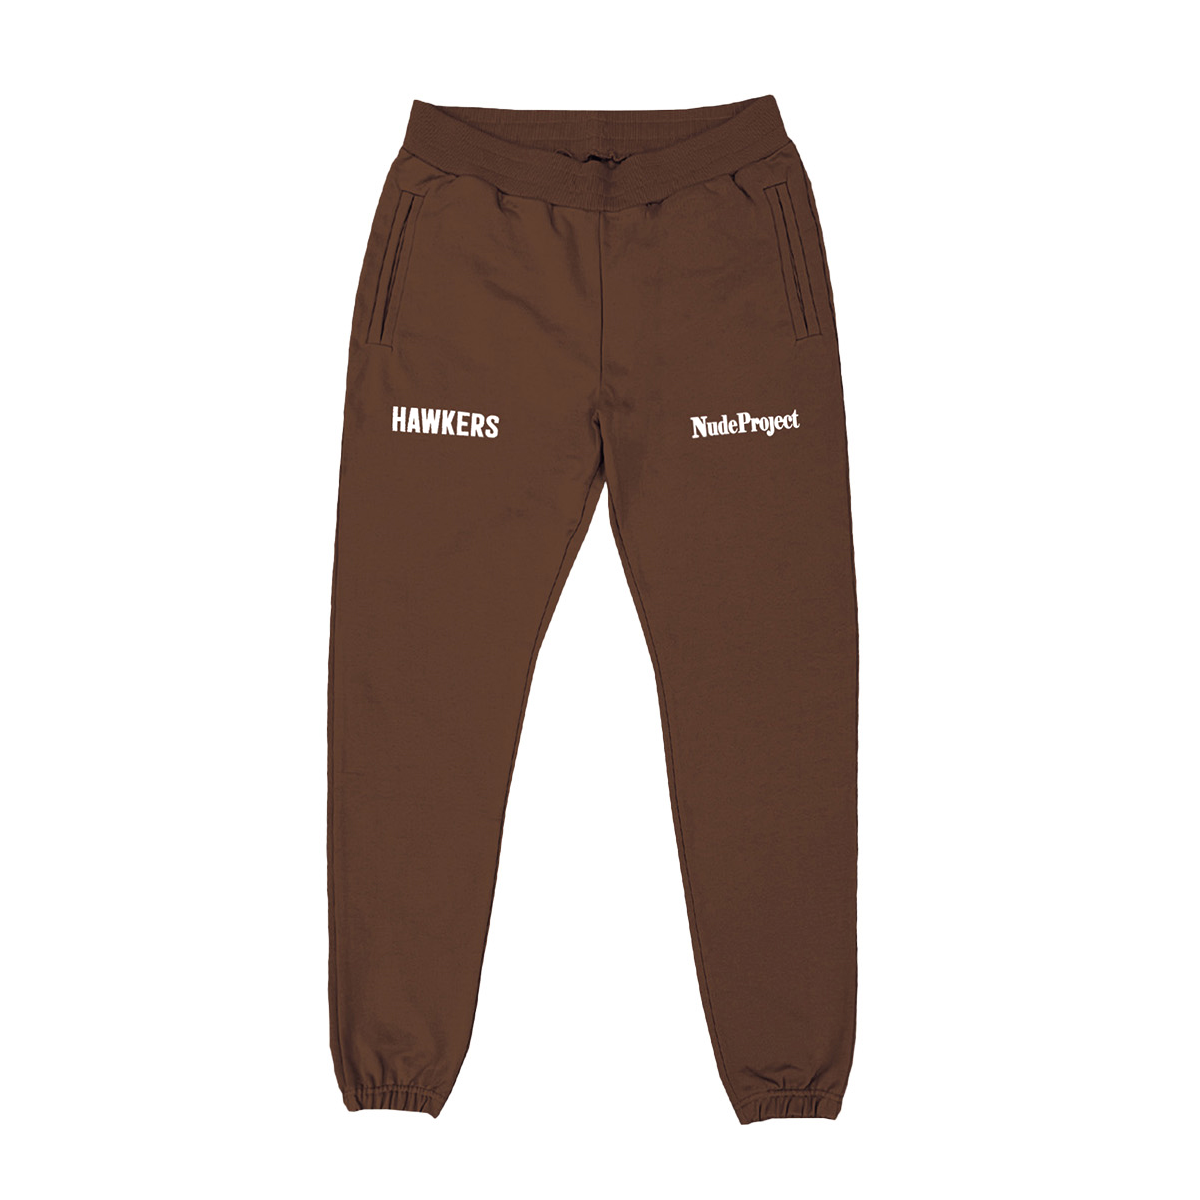 Hawkers X Nude - Motto Sweatpants (m)